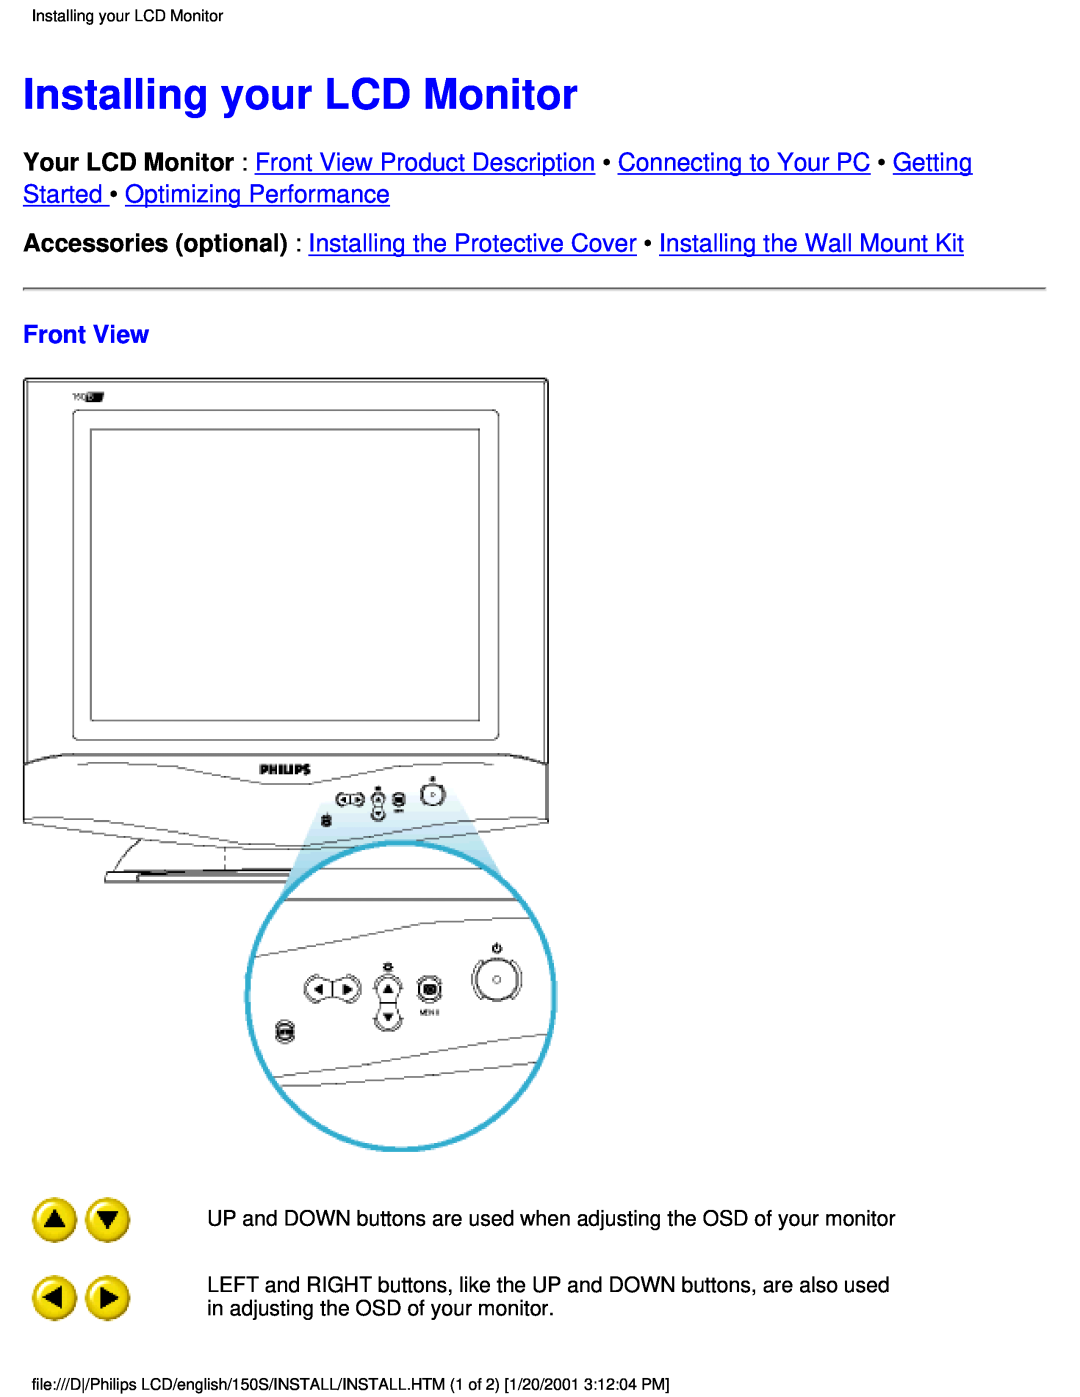 Philips 150S user manual Installing your LCD Monitor, Front View 